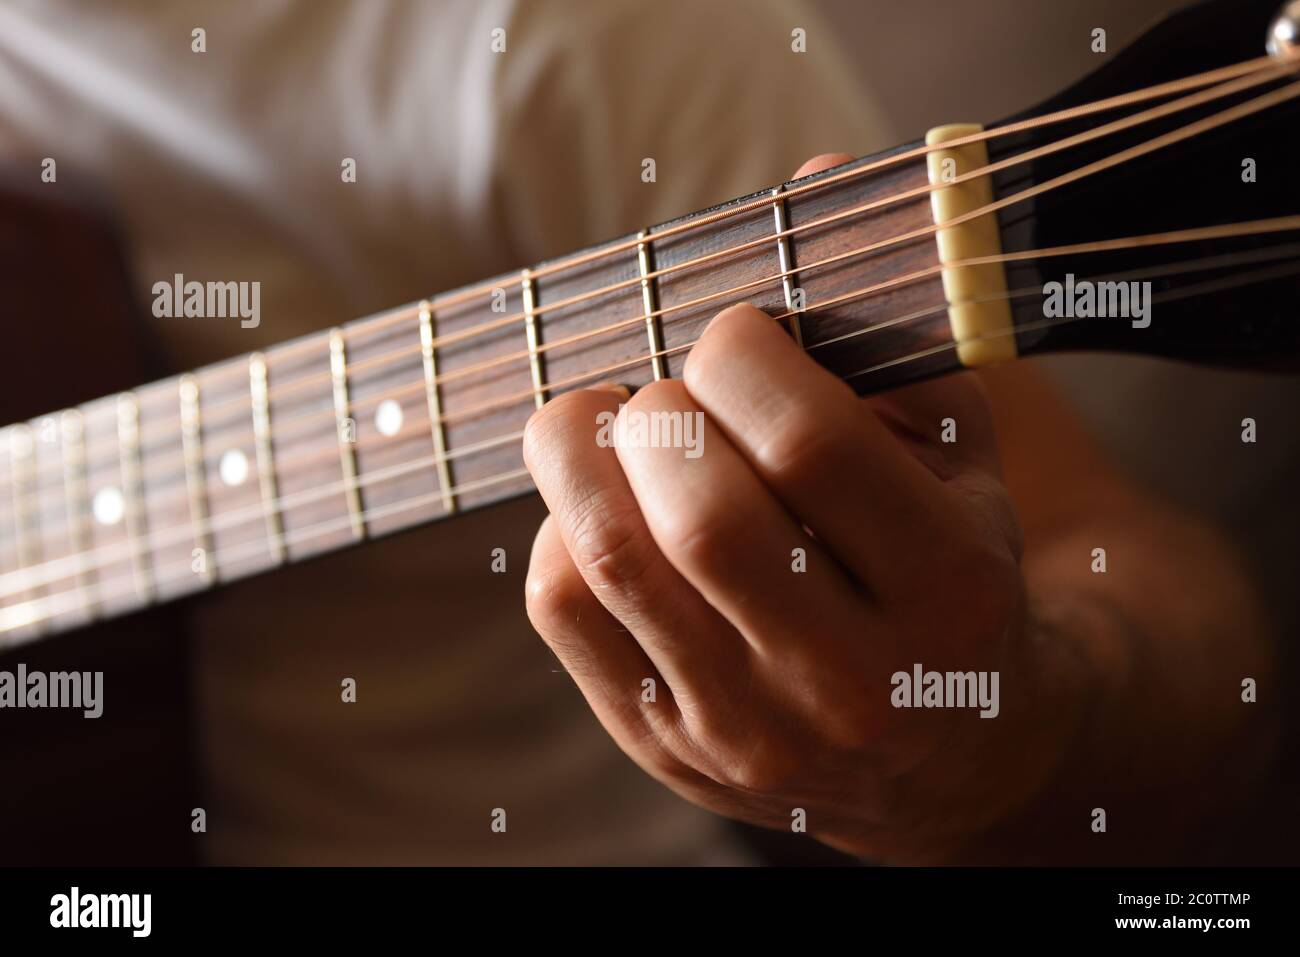 Acoustic guitar fingerboard detail and hands playing doing a D major chord Stock Photo